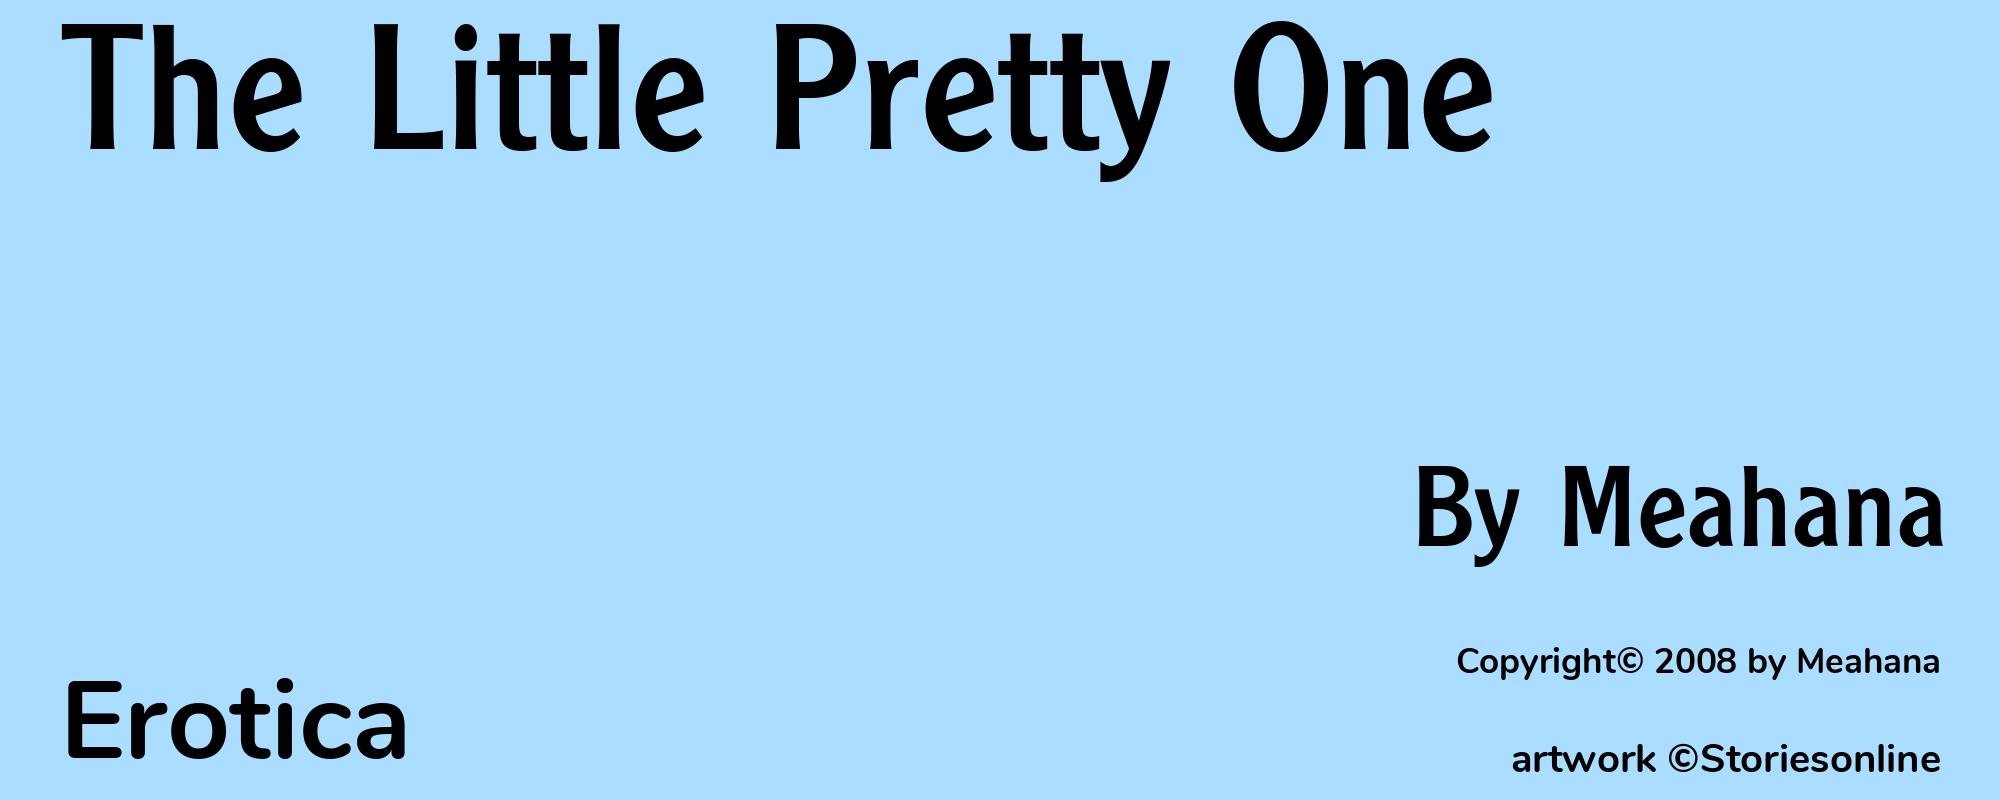 The Little Pretty One - Cover